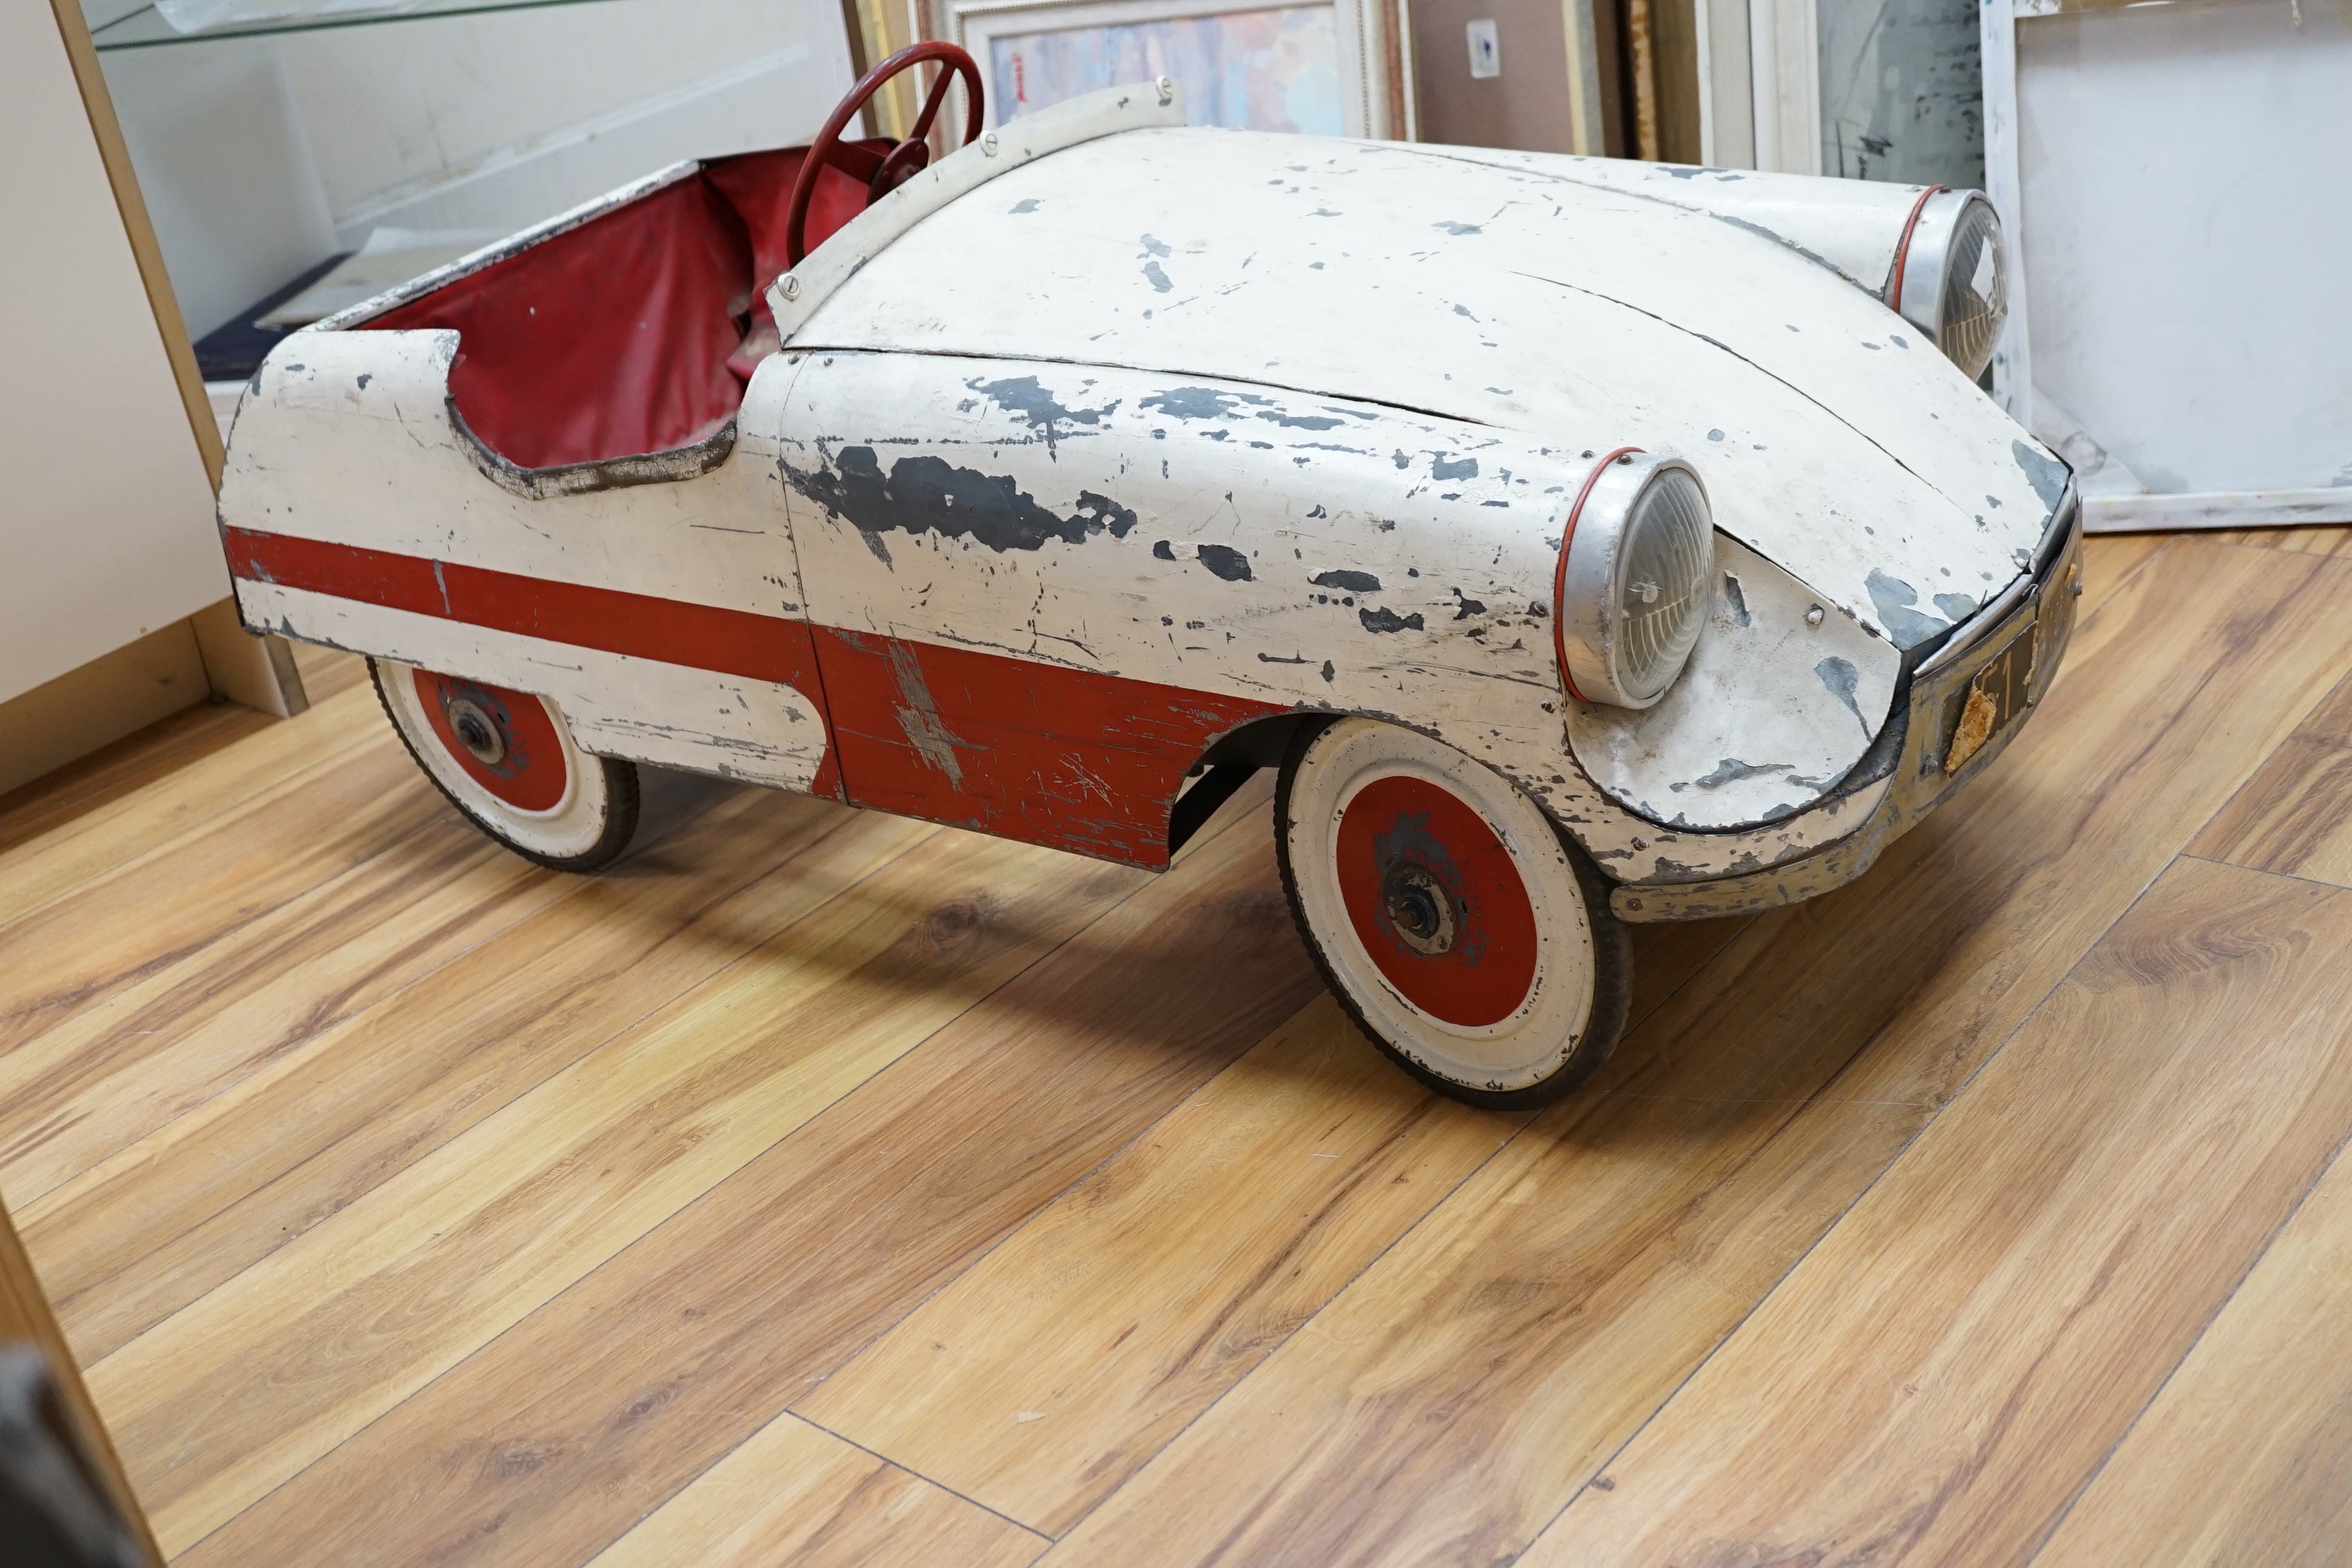 A 1959 pedal car based on Citroen DS